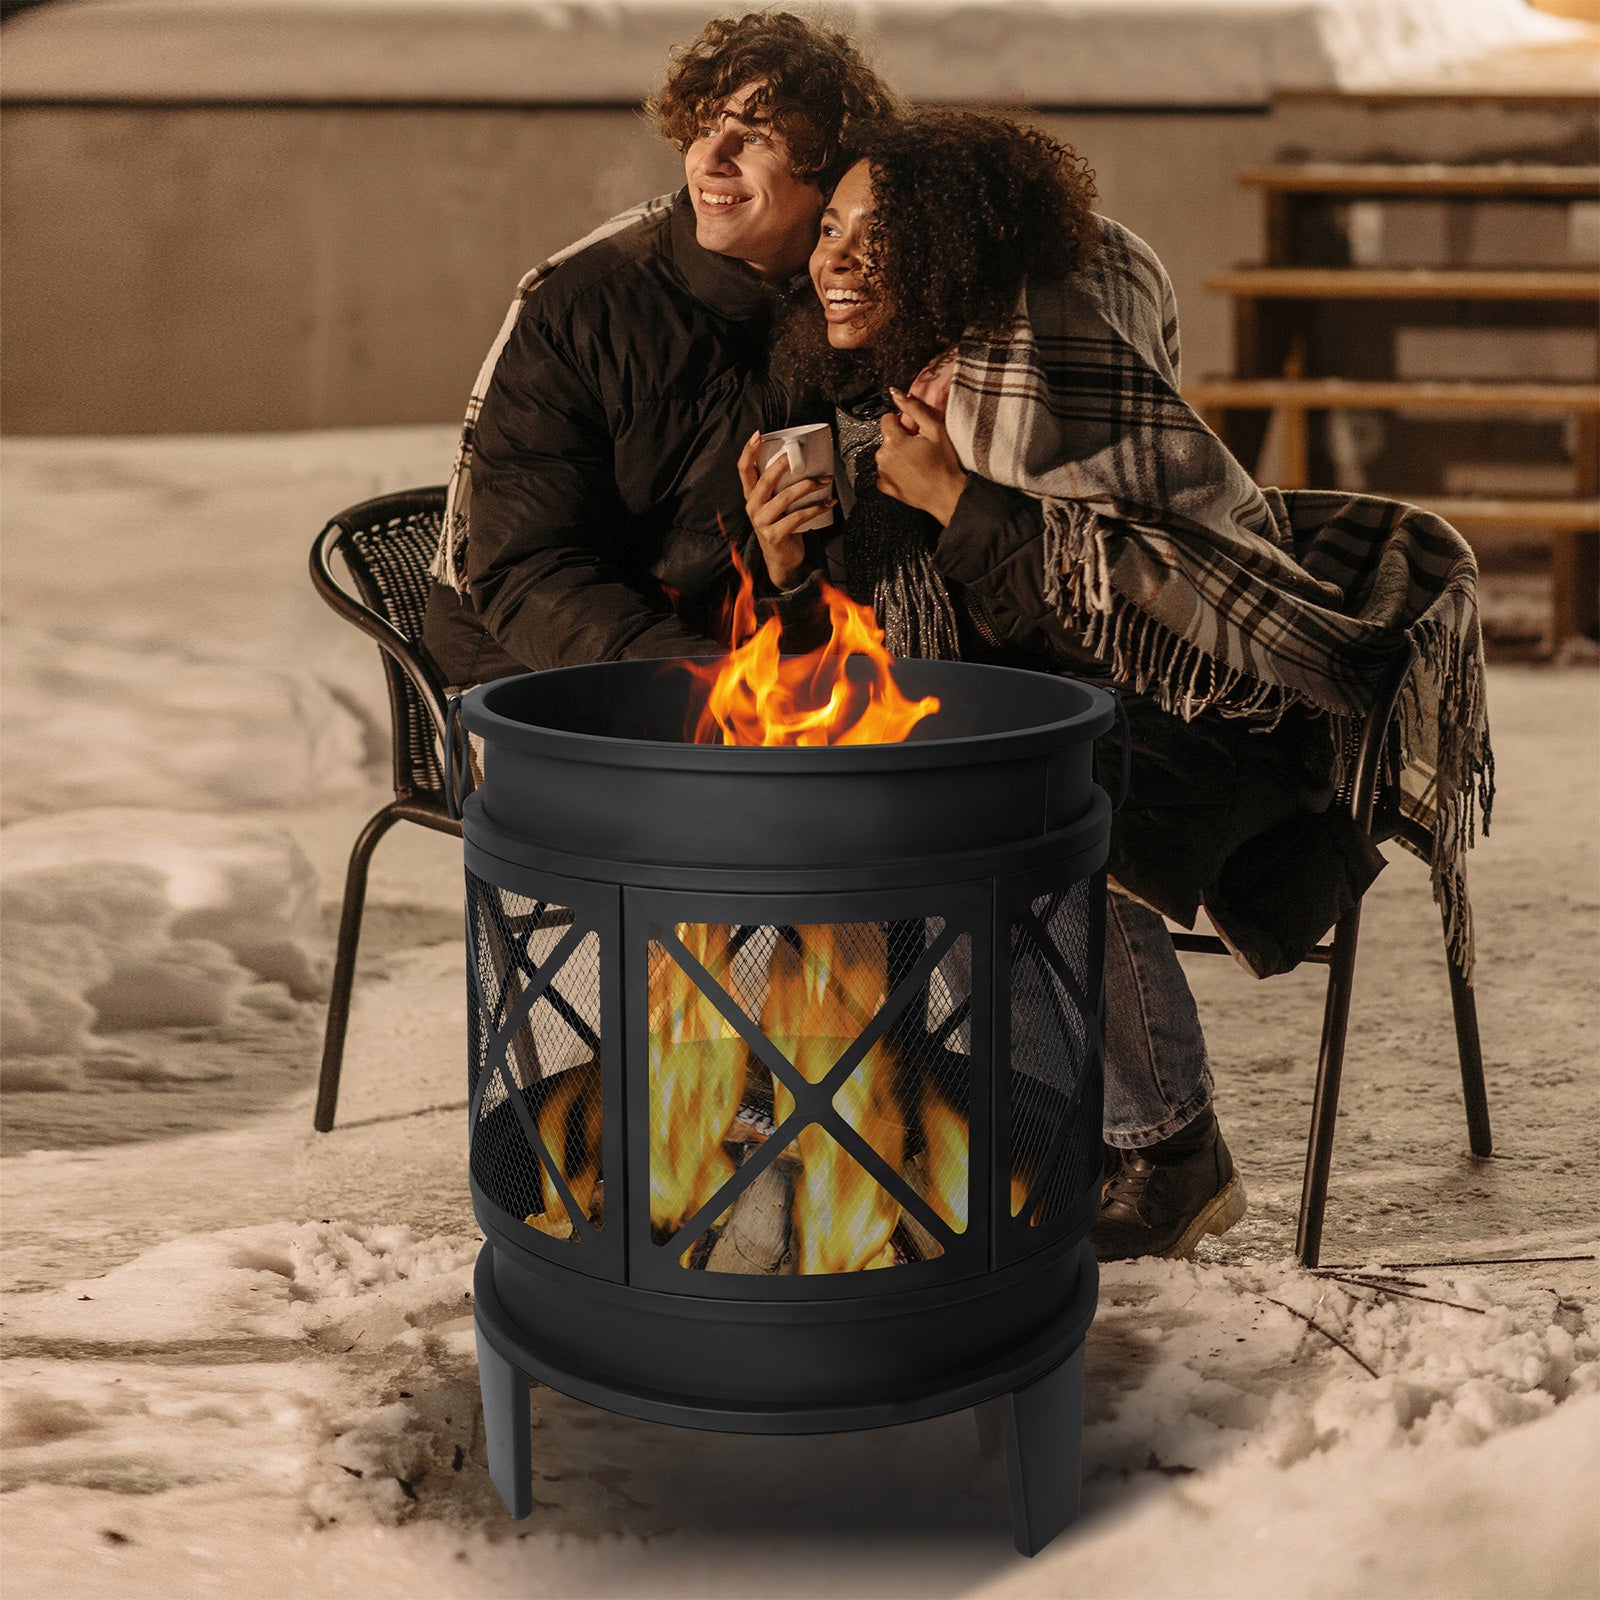 Barrel Outdoor Wood Burning Fire Pit 23.2" Patio Fireplace with Spark Screen and Poker